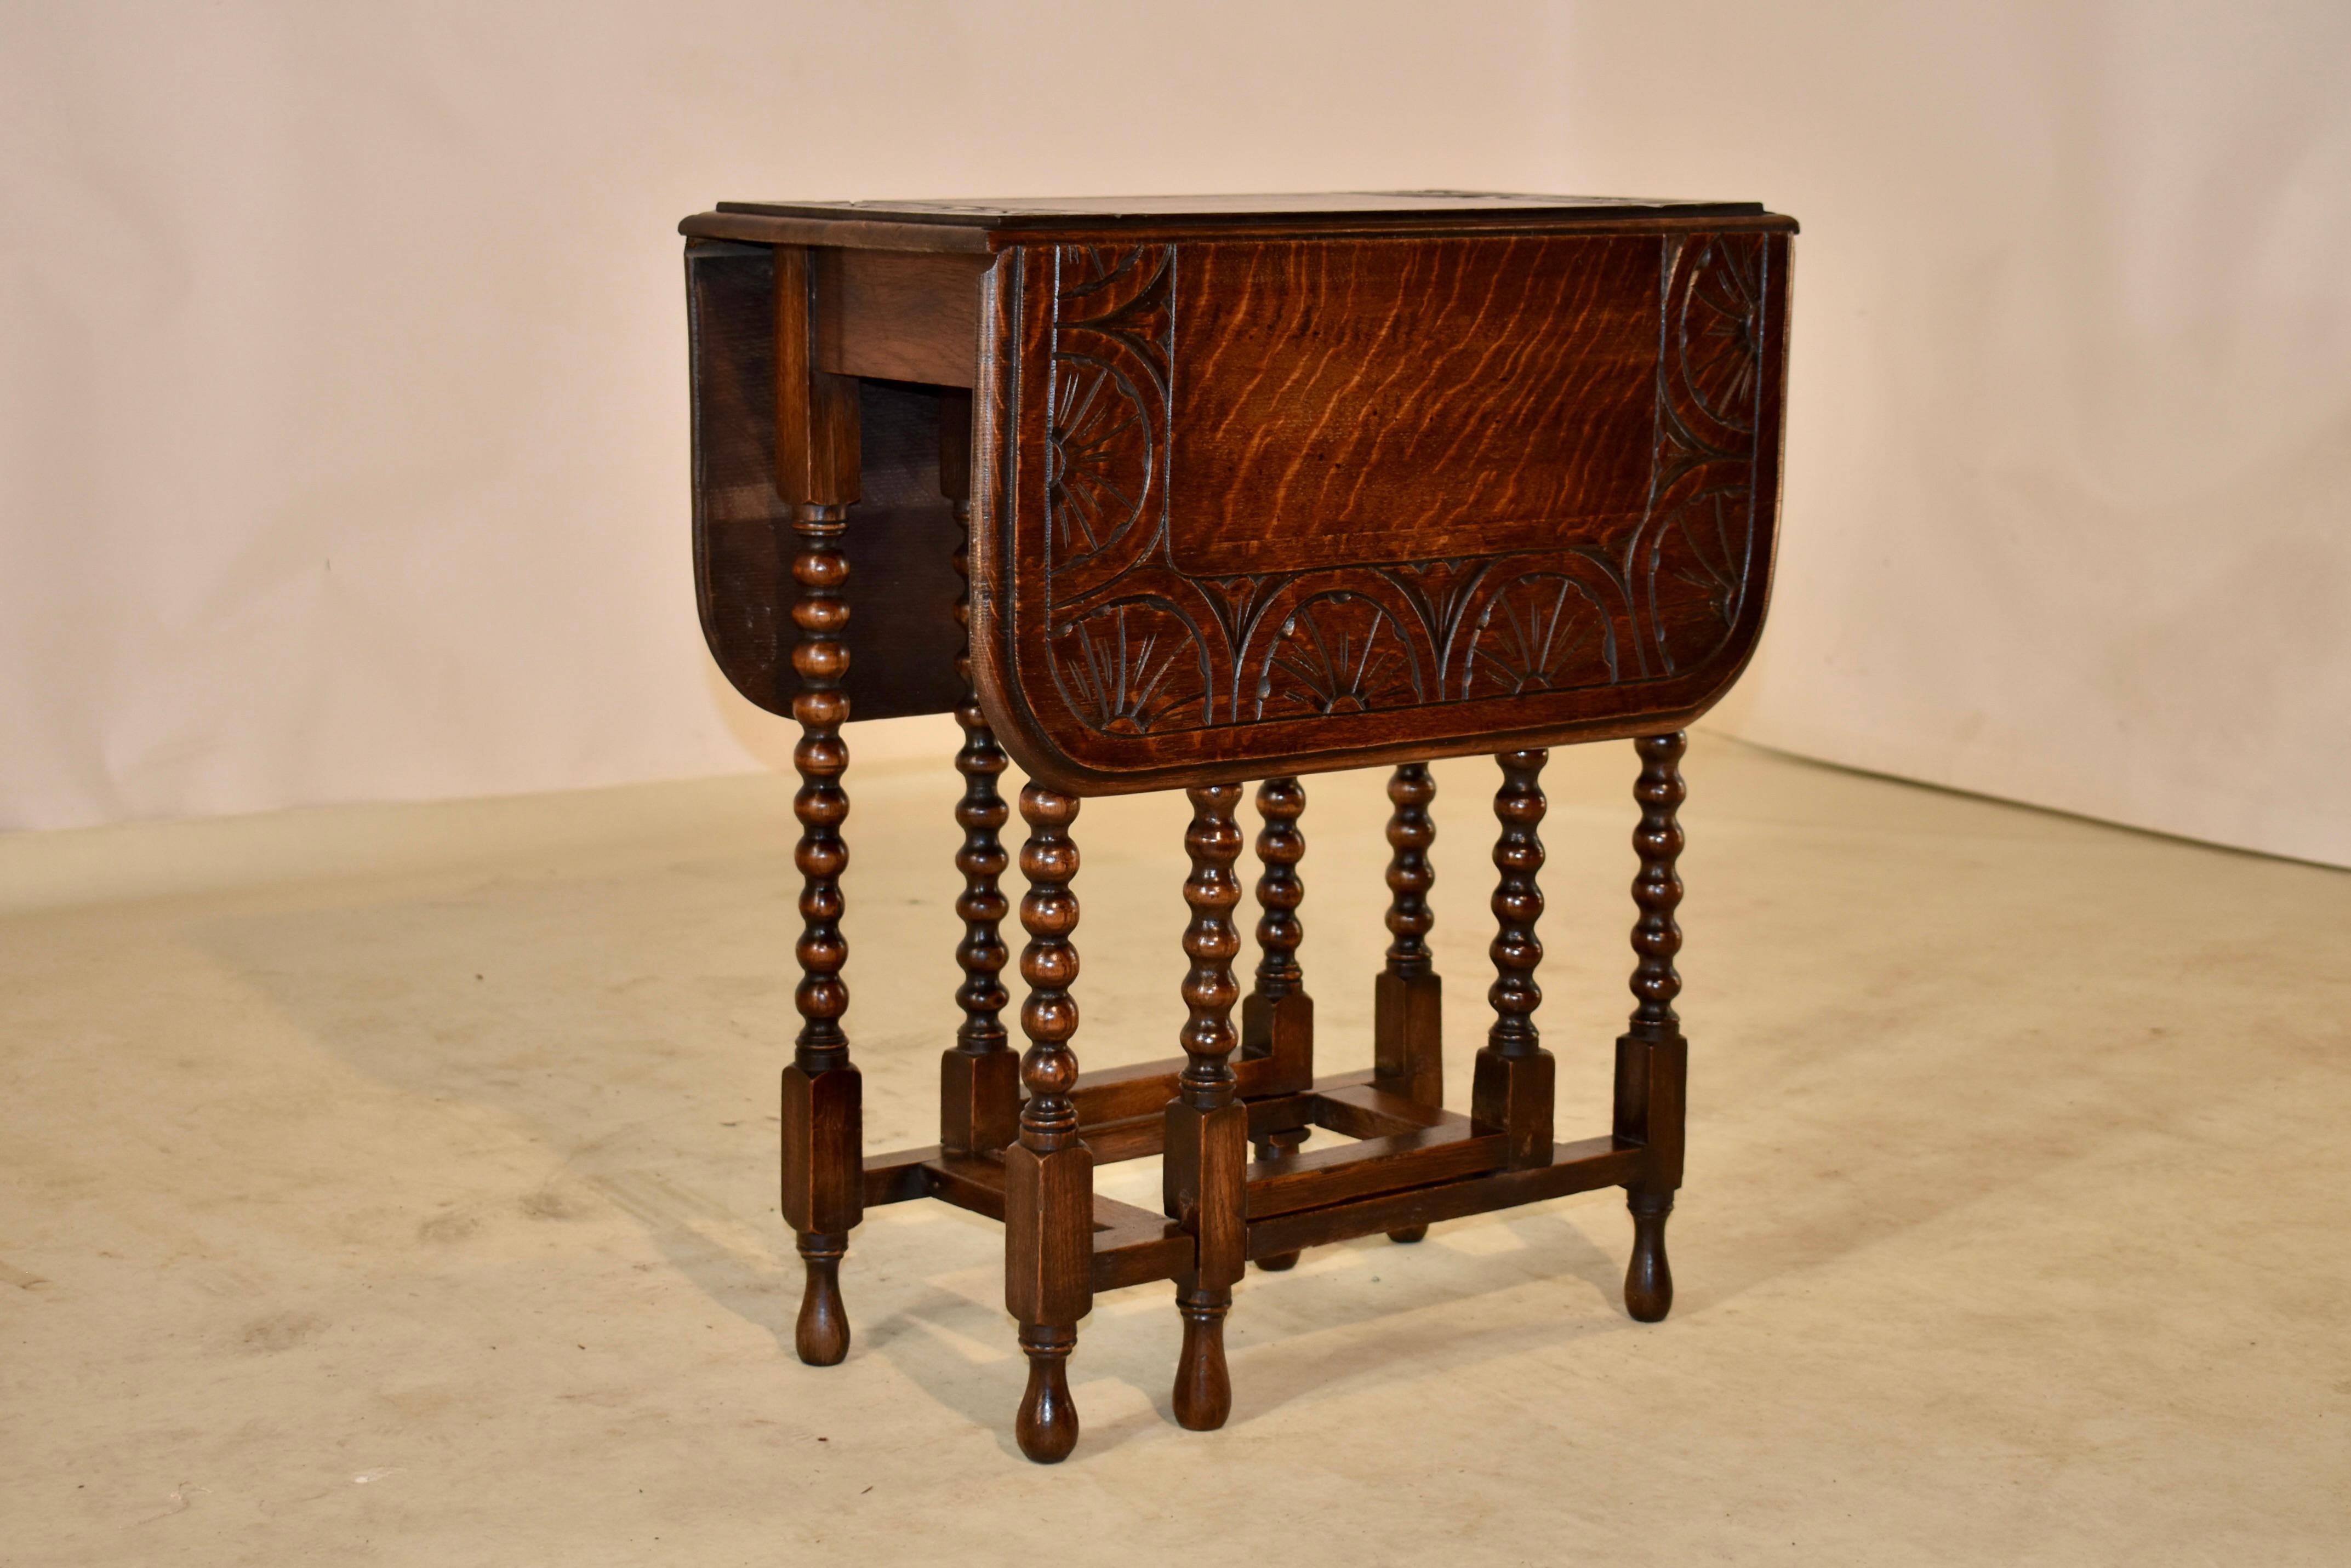 19th century oak gate leg table from England with hand carved decorated banding around the top, also with a beveled edge. The top follows down to simple aprons and the table is supported on hand turned bobbin legs. The legs and gates are joined by